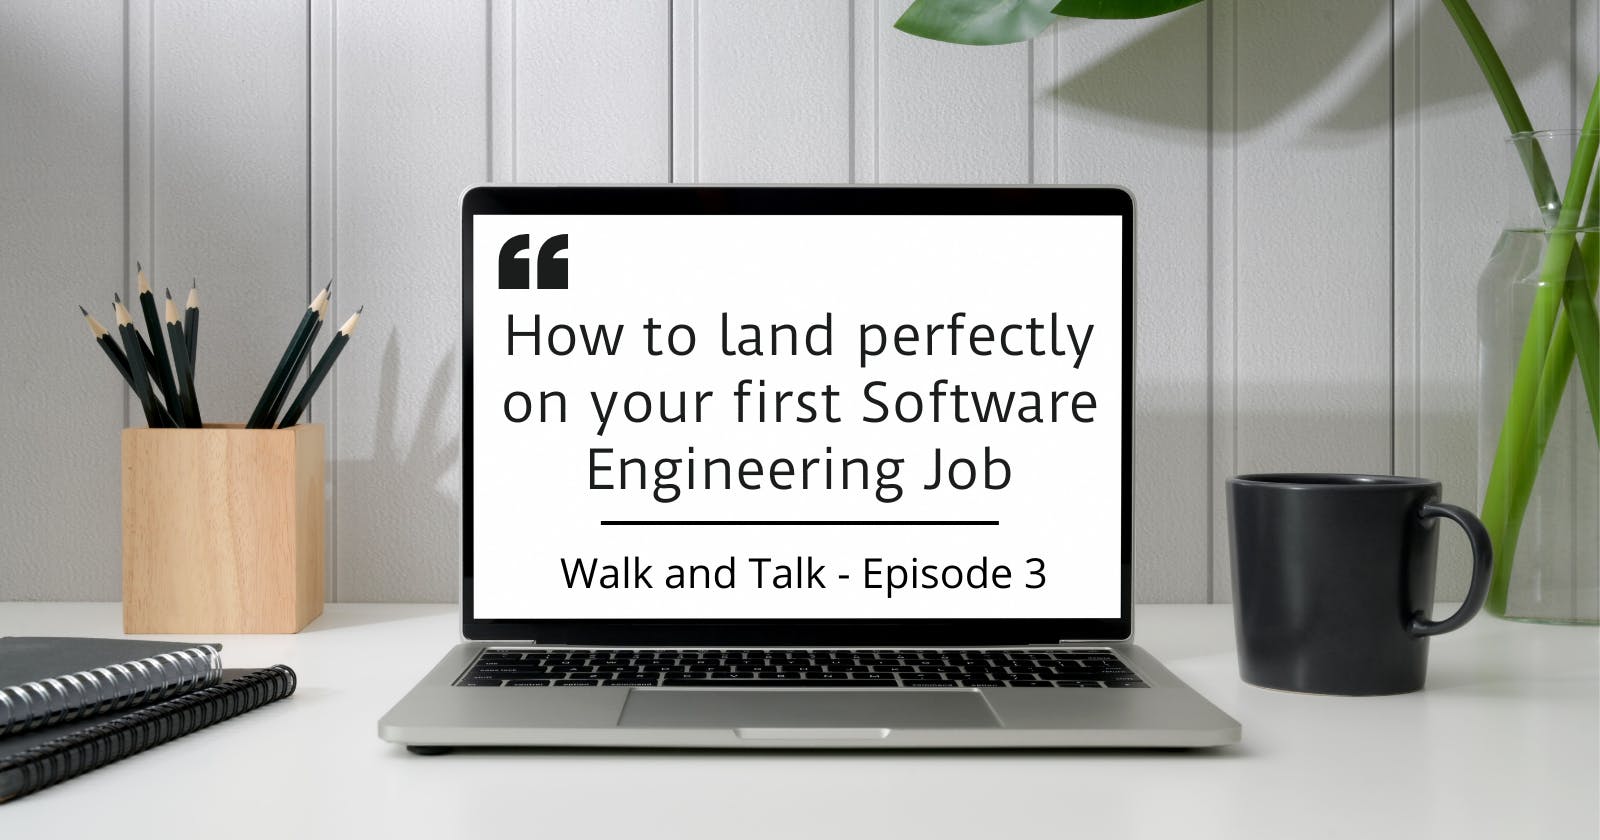 How to land perfectly on your first Software Engineering Job